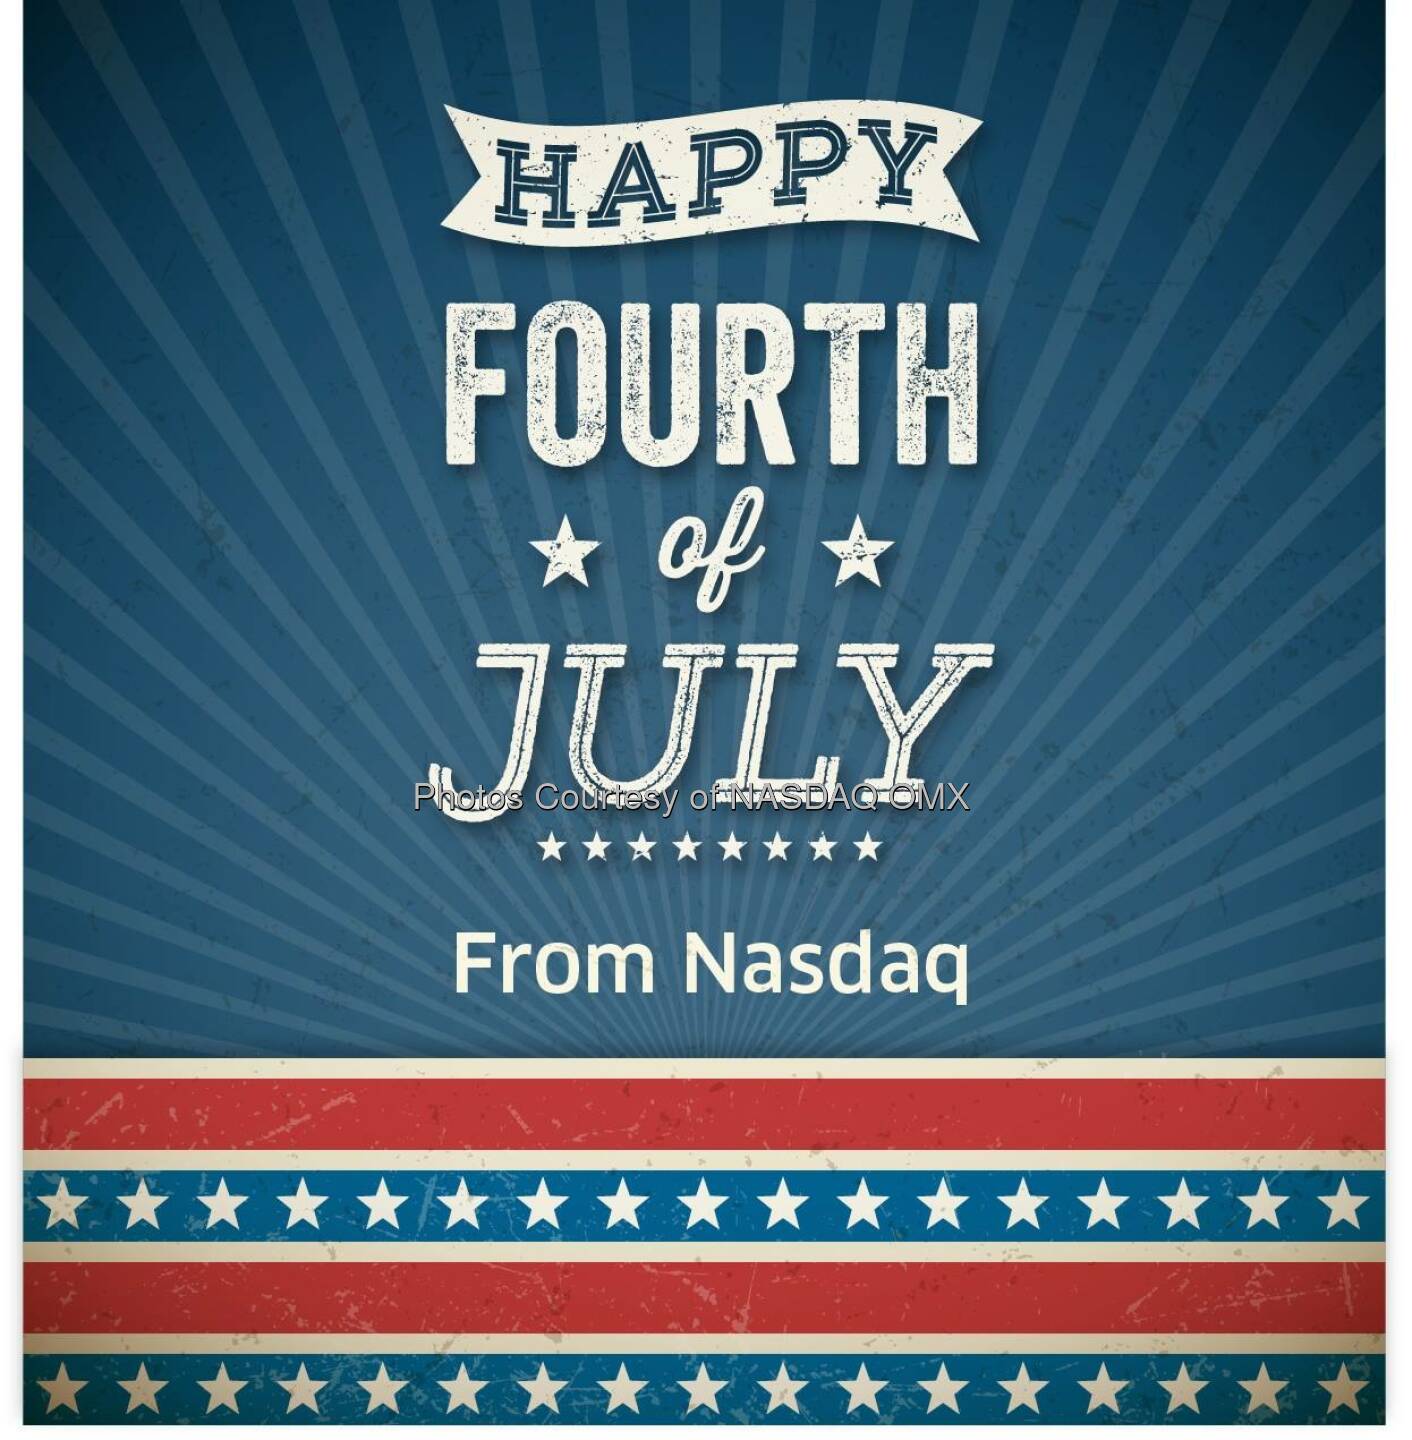 Happy July 4th from everyone here at Nasdaq!  #IndependenceDay   Source: http://facebook.com/NASDAQ